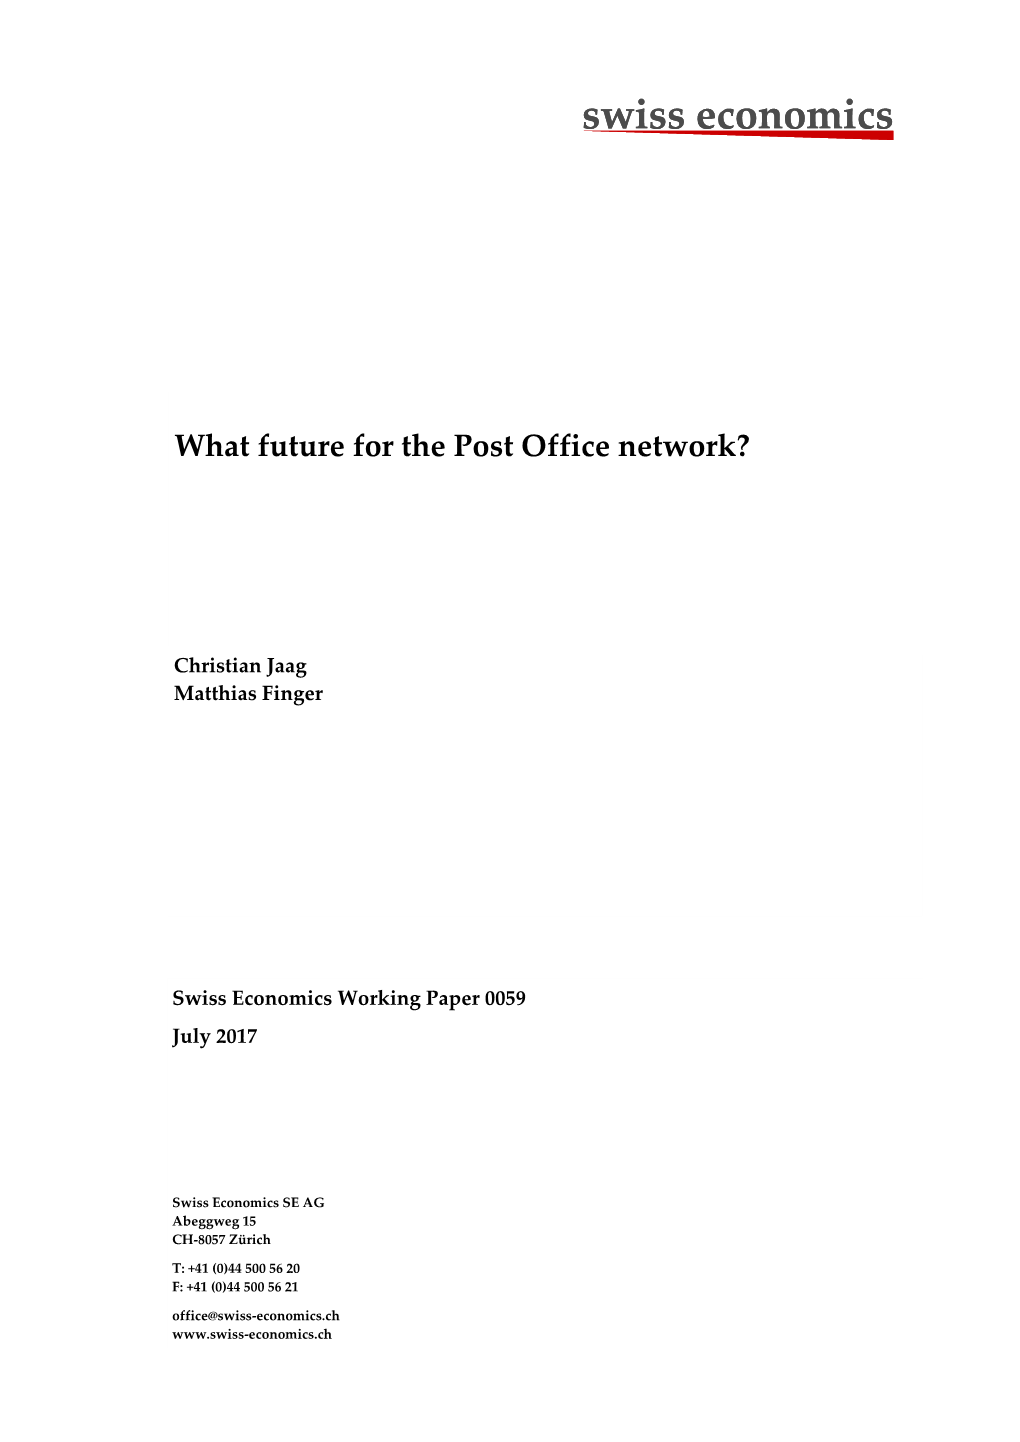 What Future for the Post Office Network?